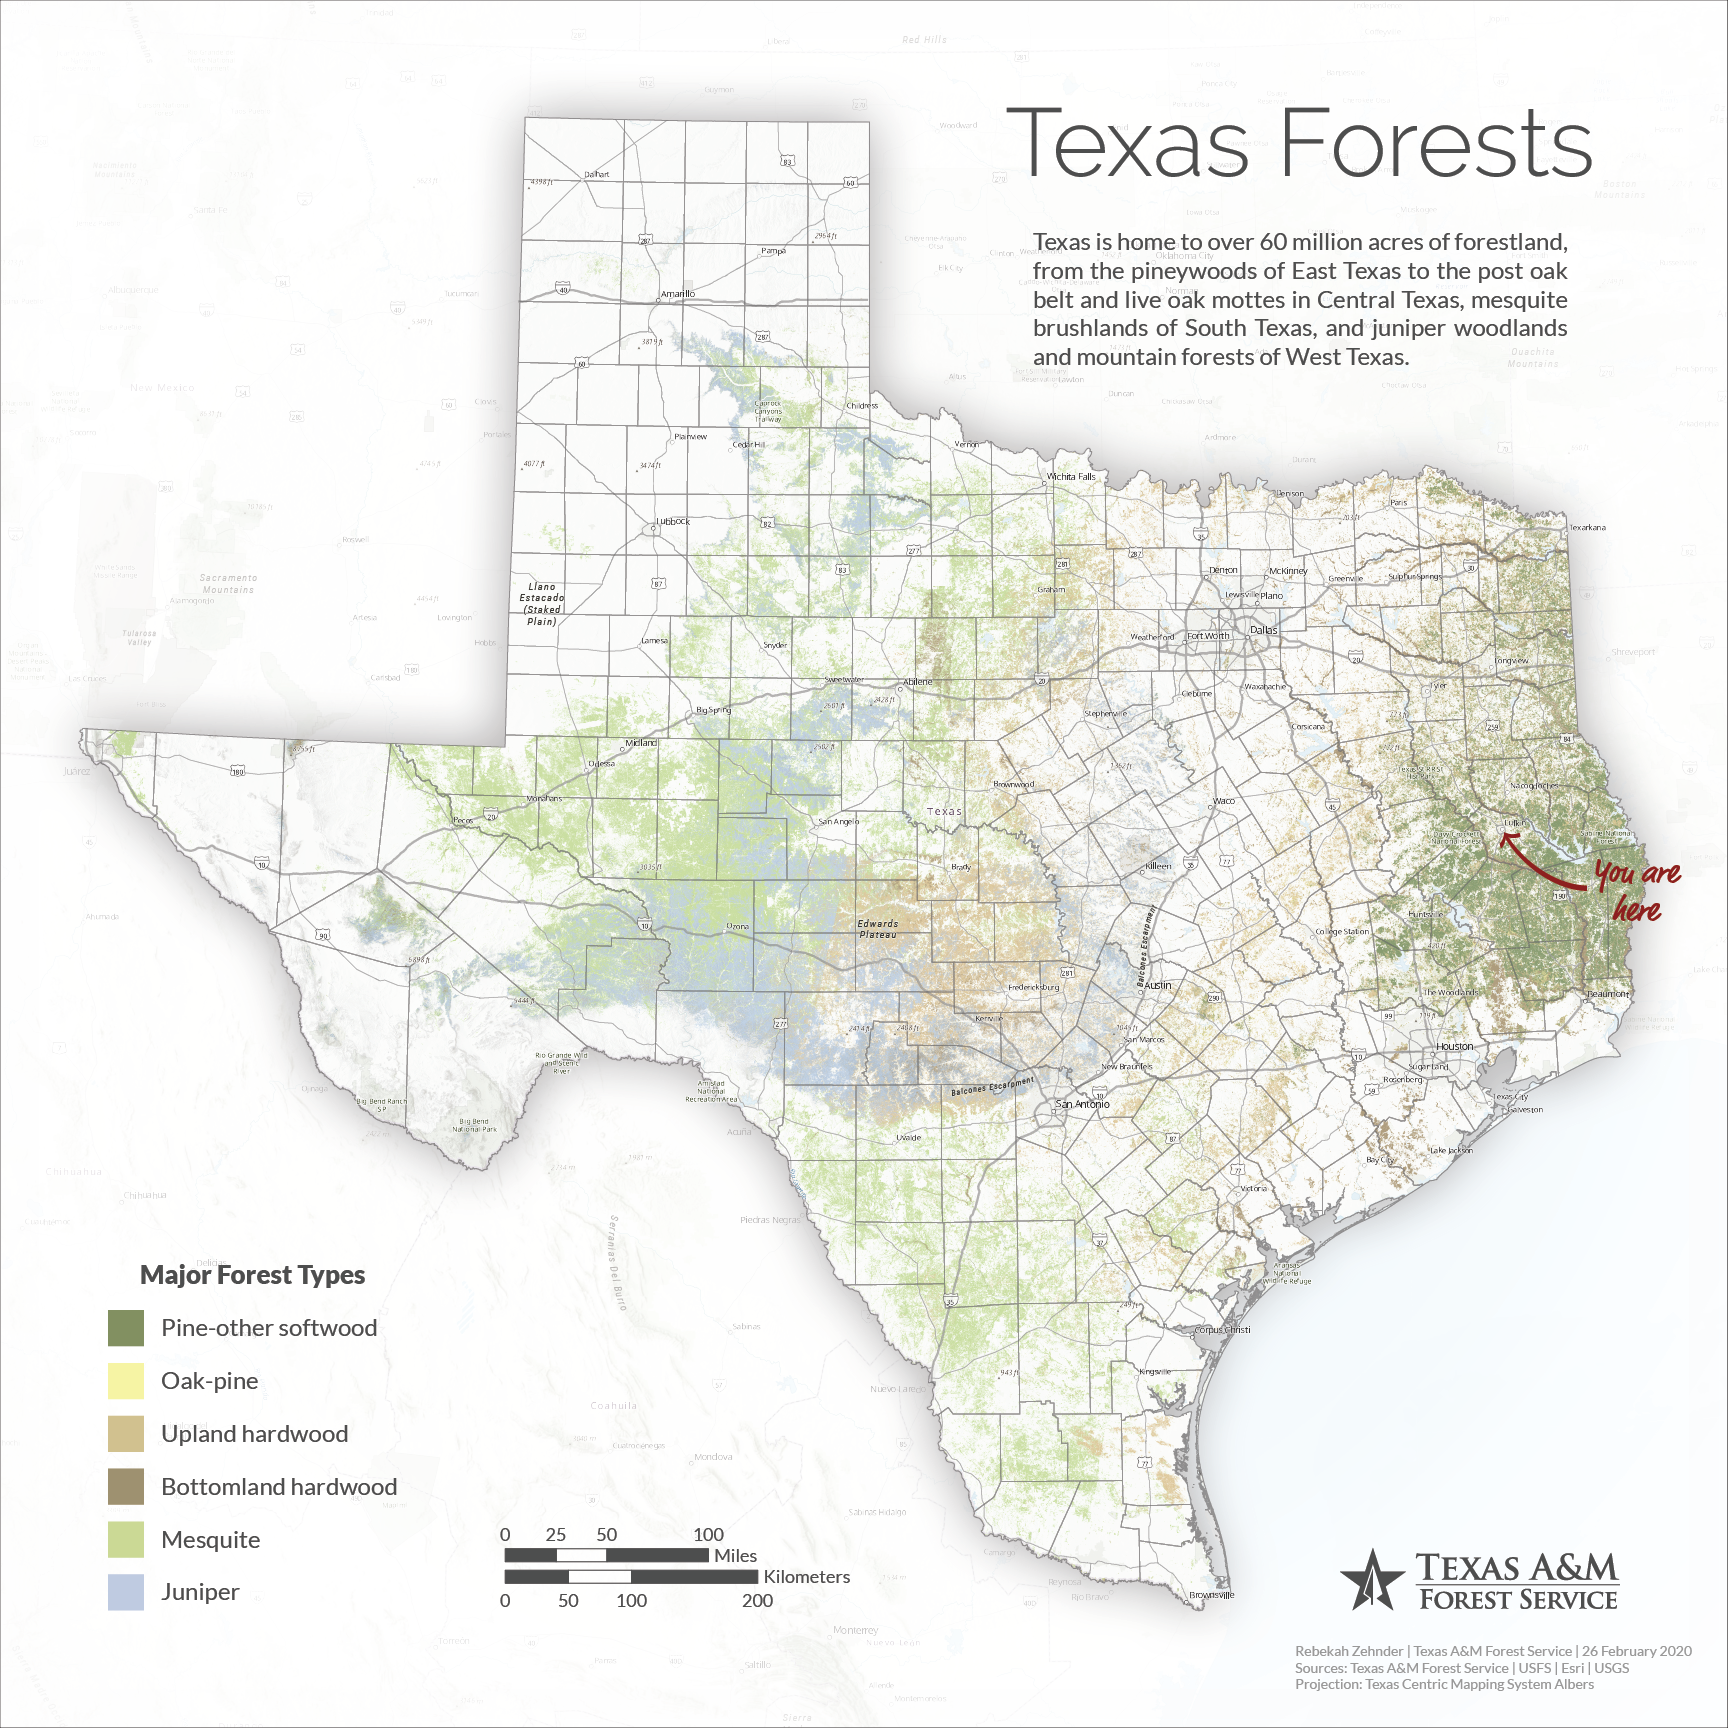 Texas Forests